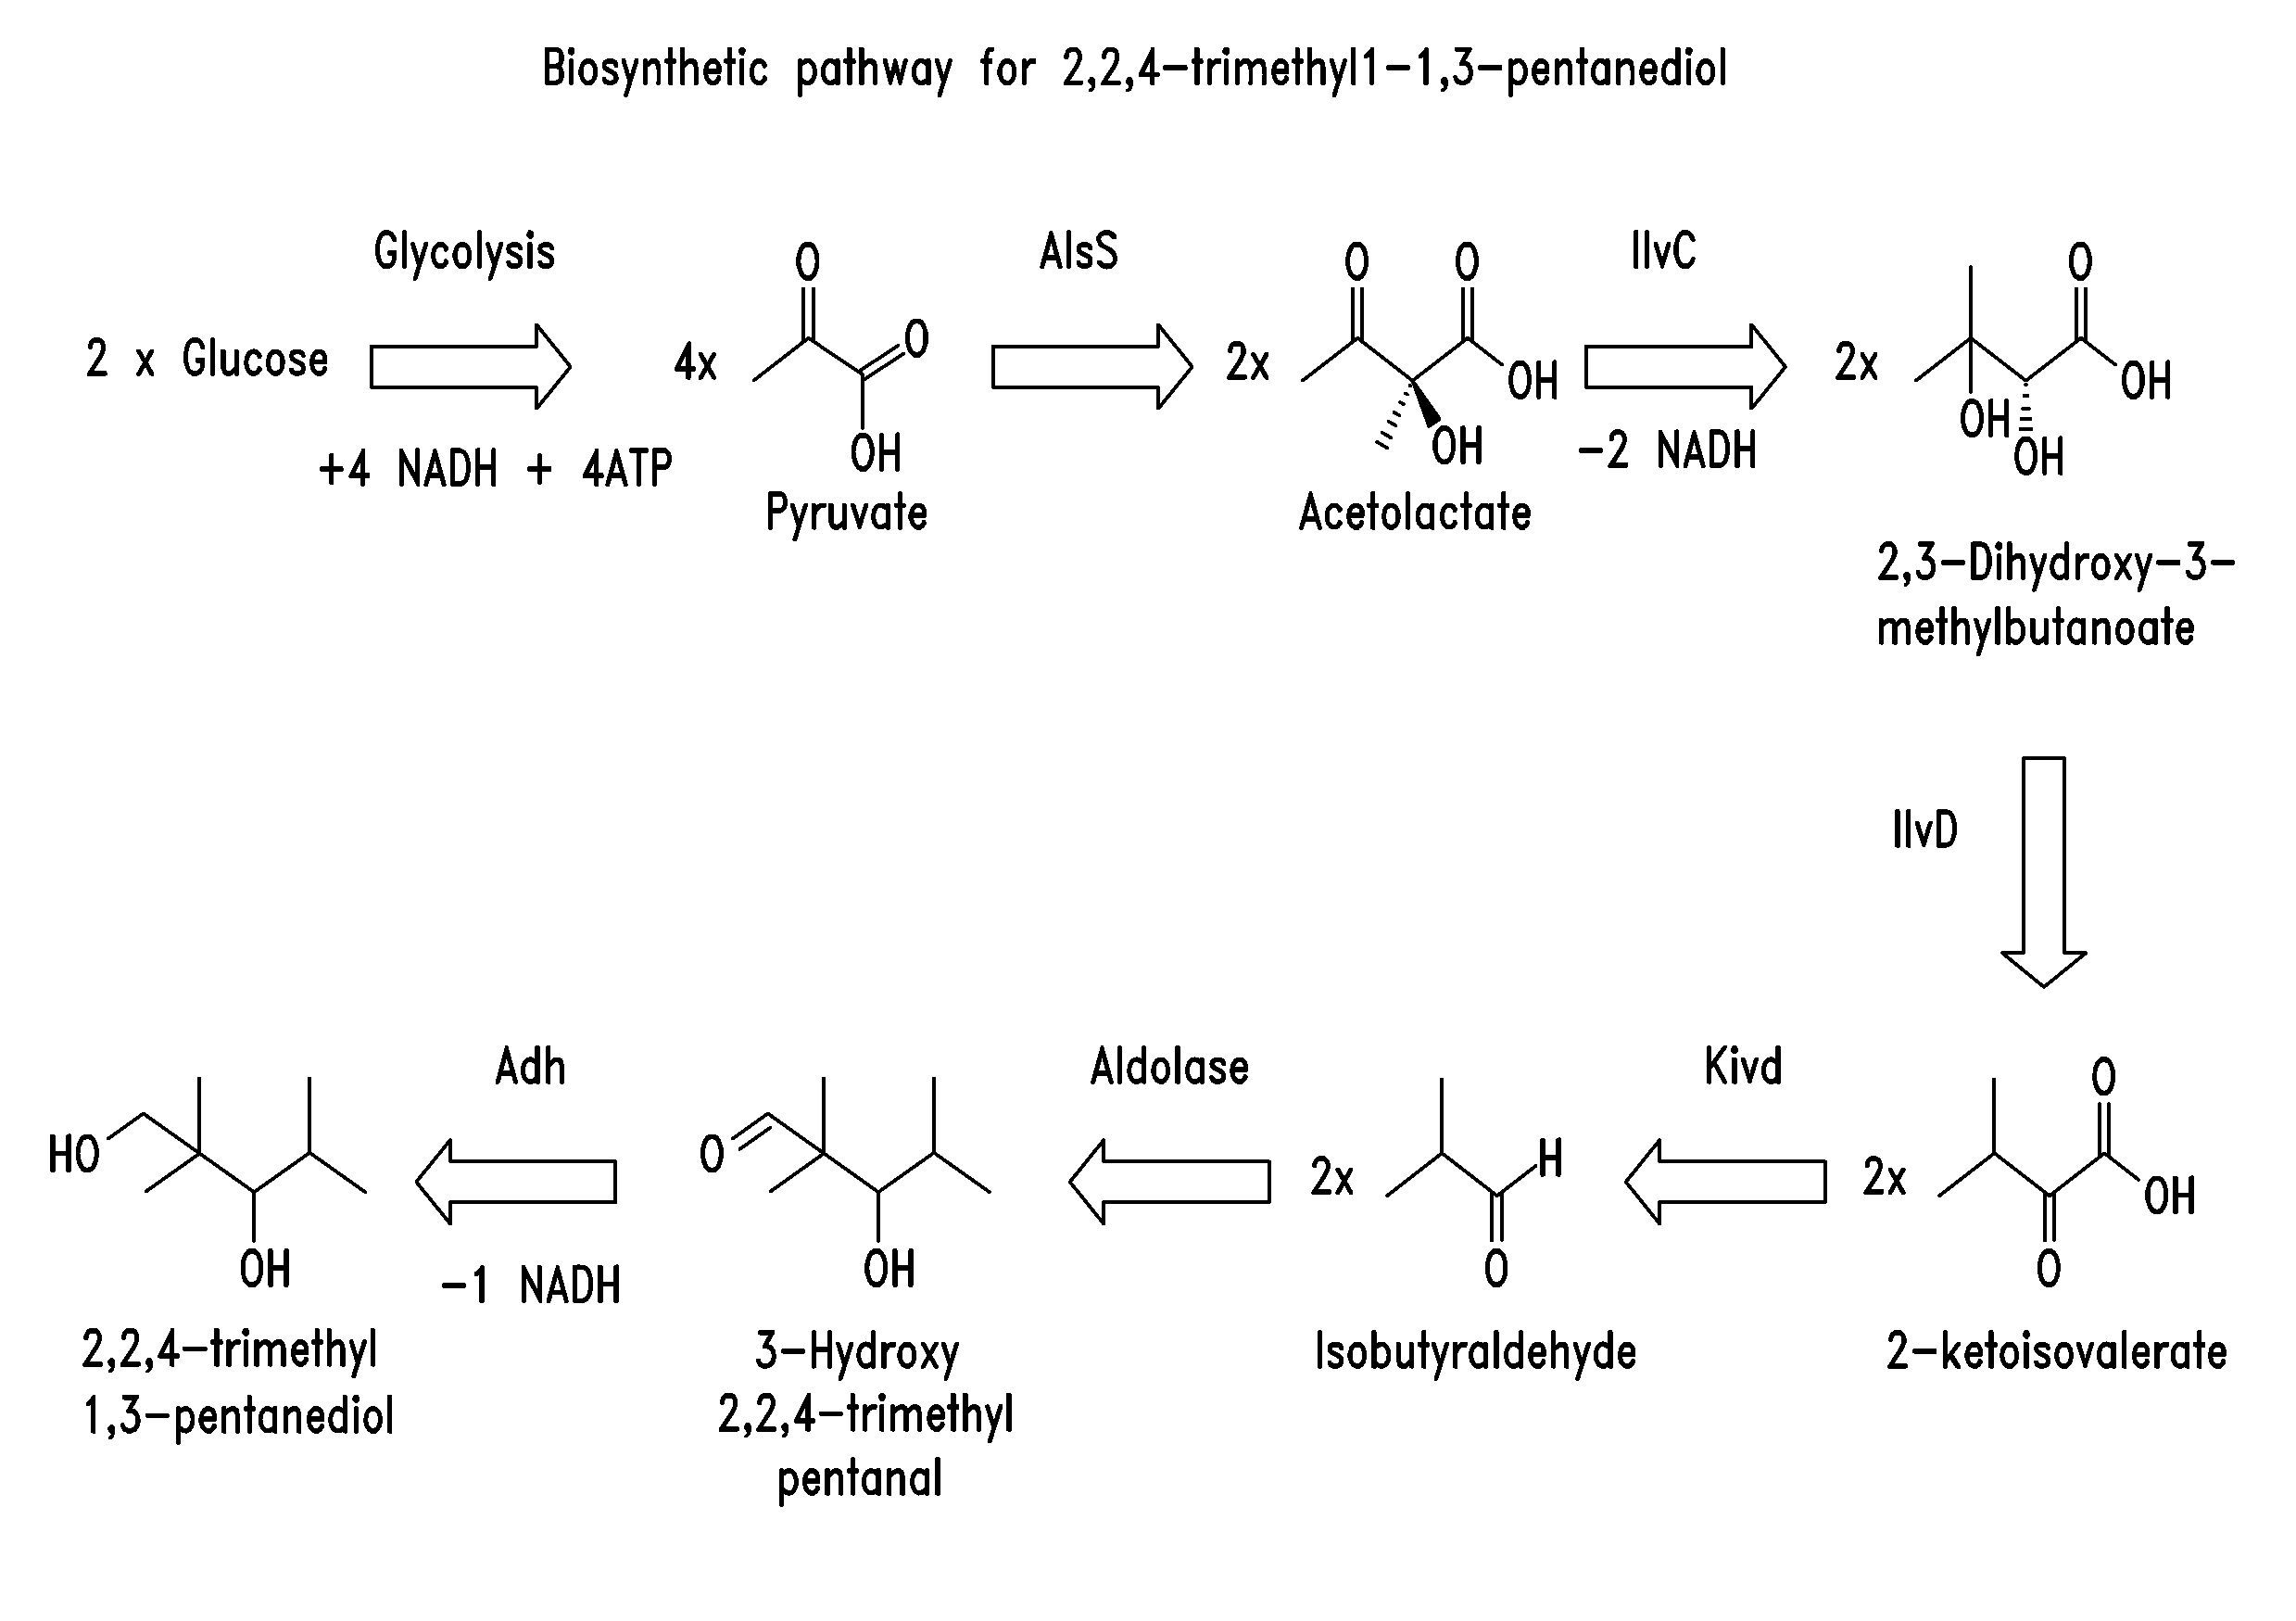 Biosynthesis of commodity chemicals